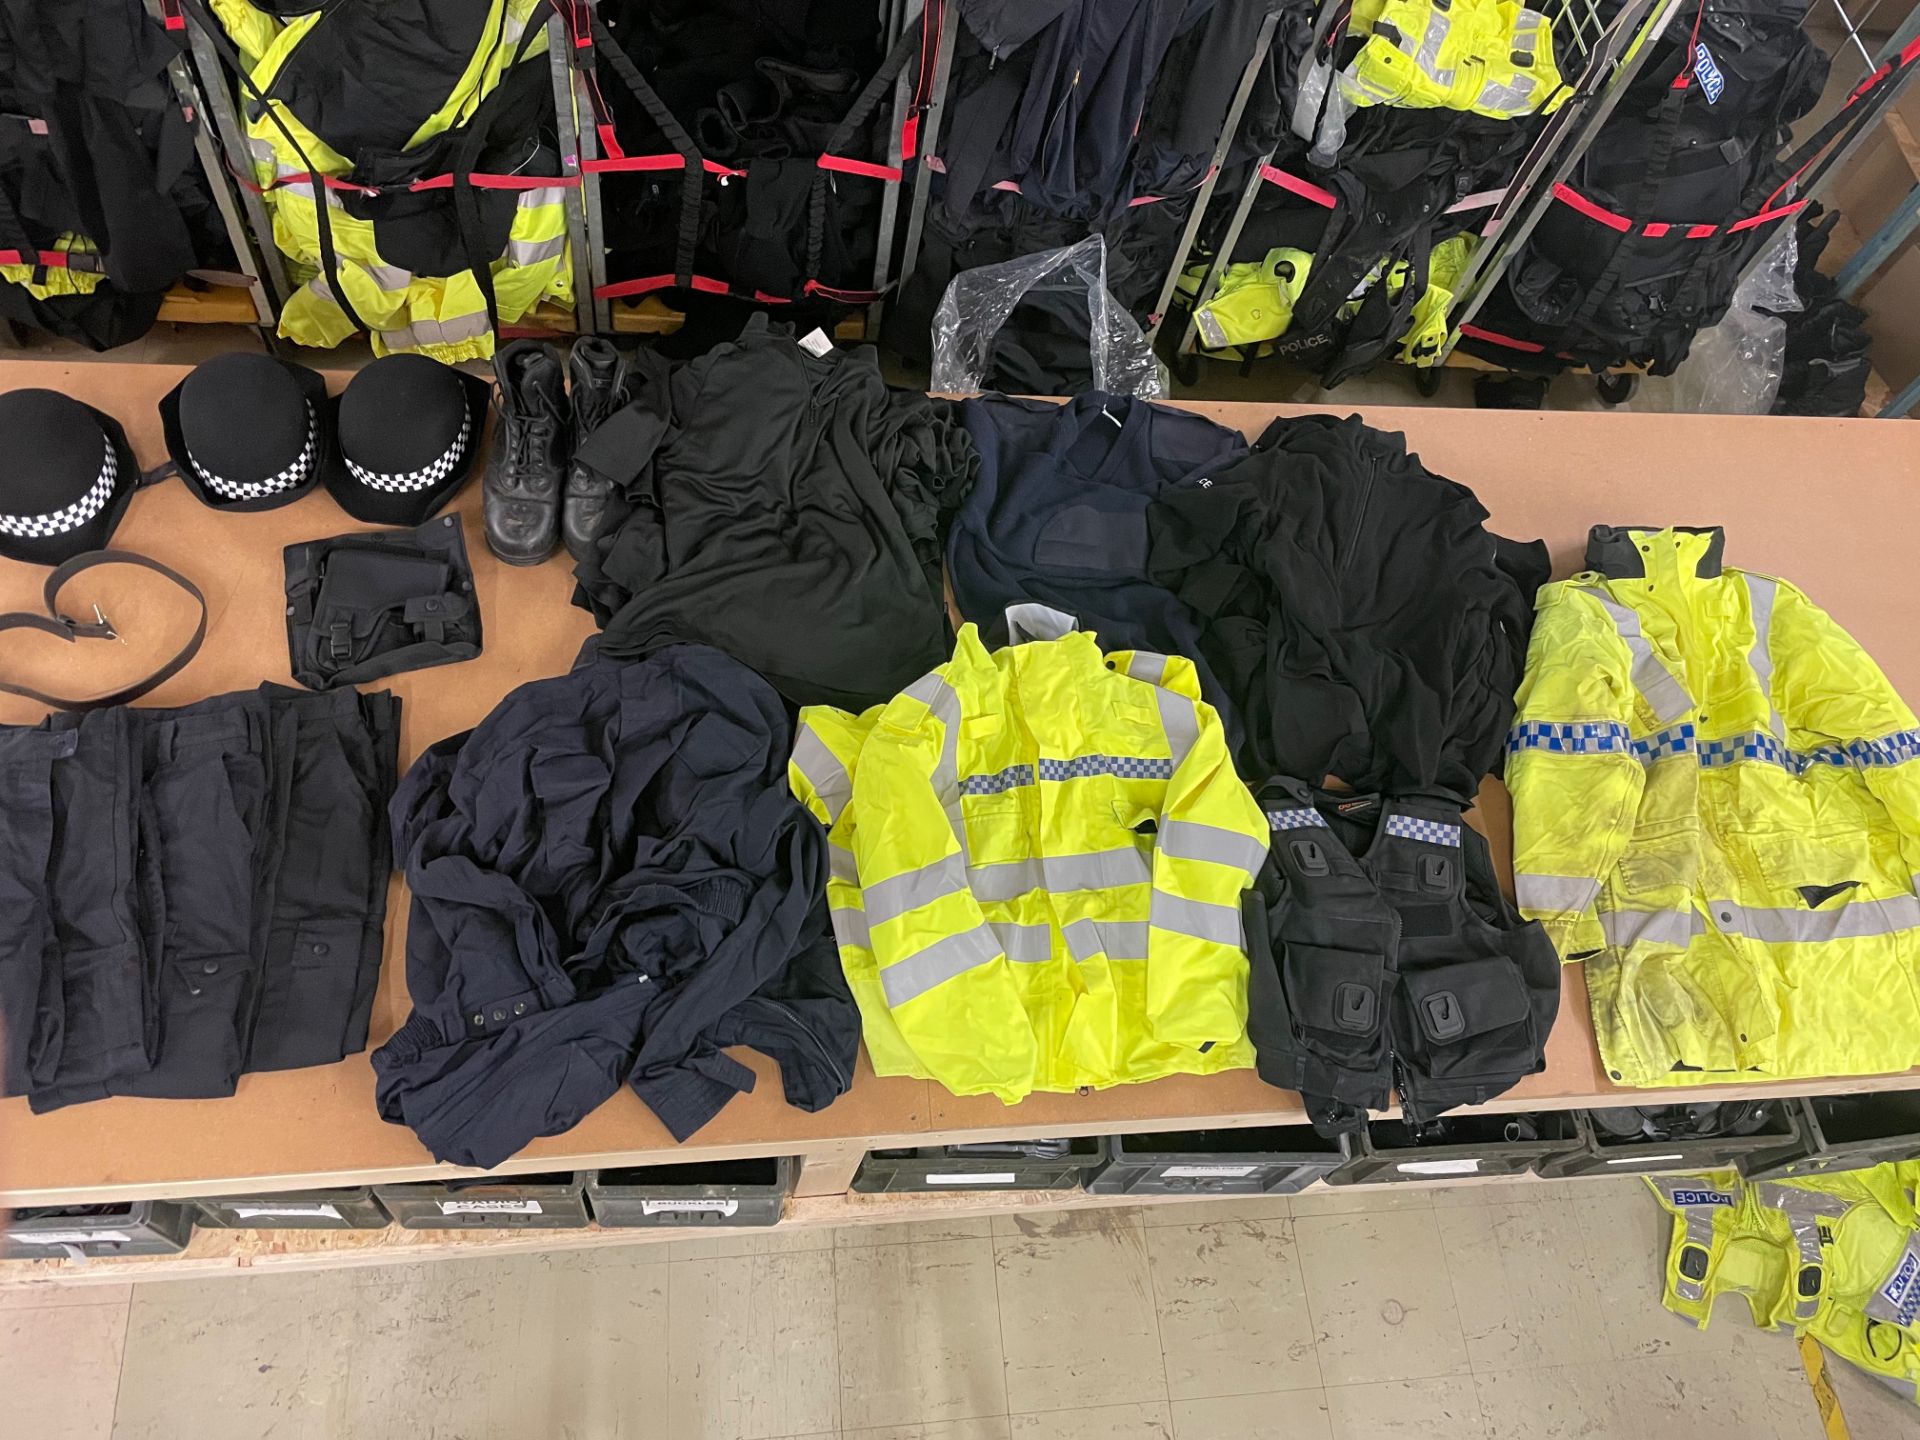 5 X BAGS EX POLICE CLOTHING & ACCESSORIES - RRP £1375.00 - Image 5 of 12